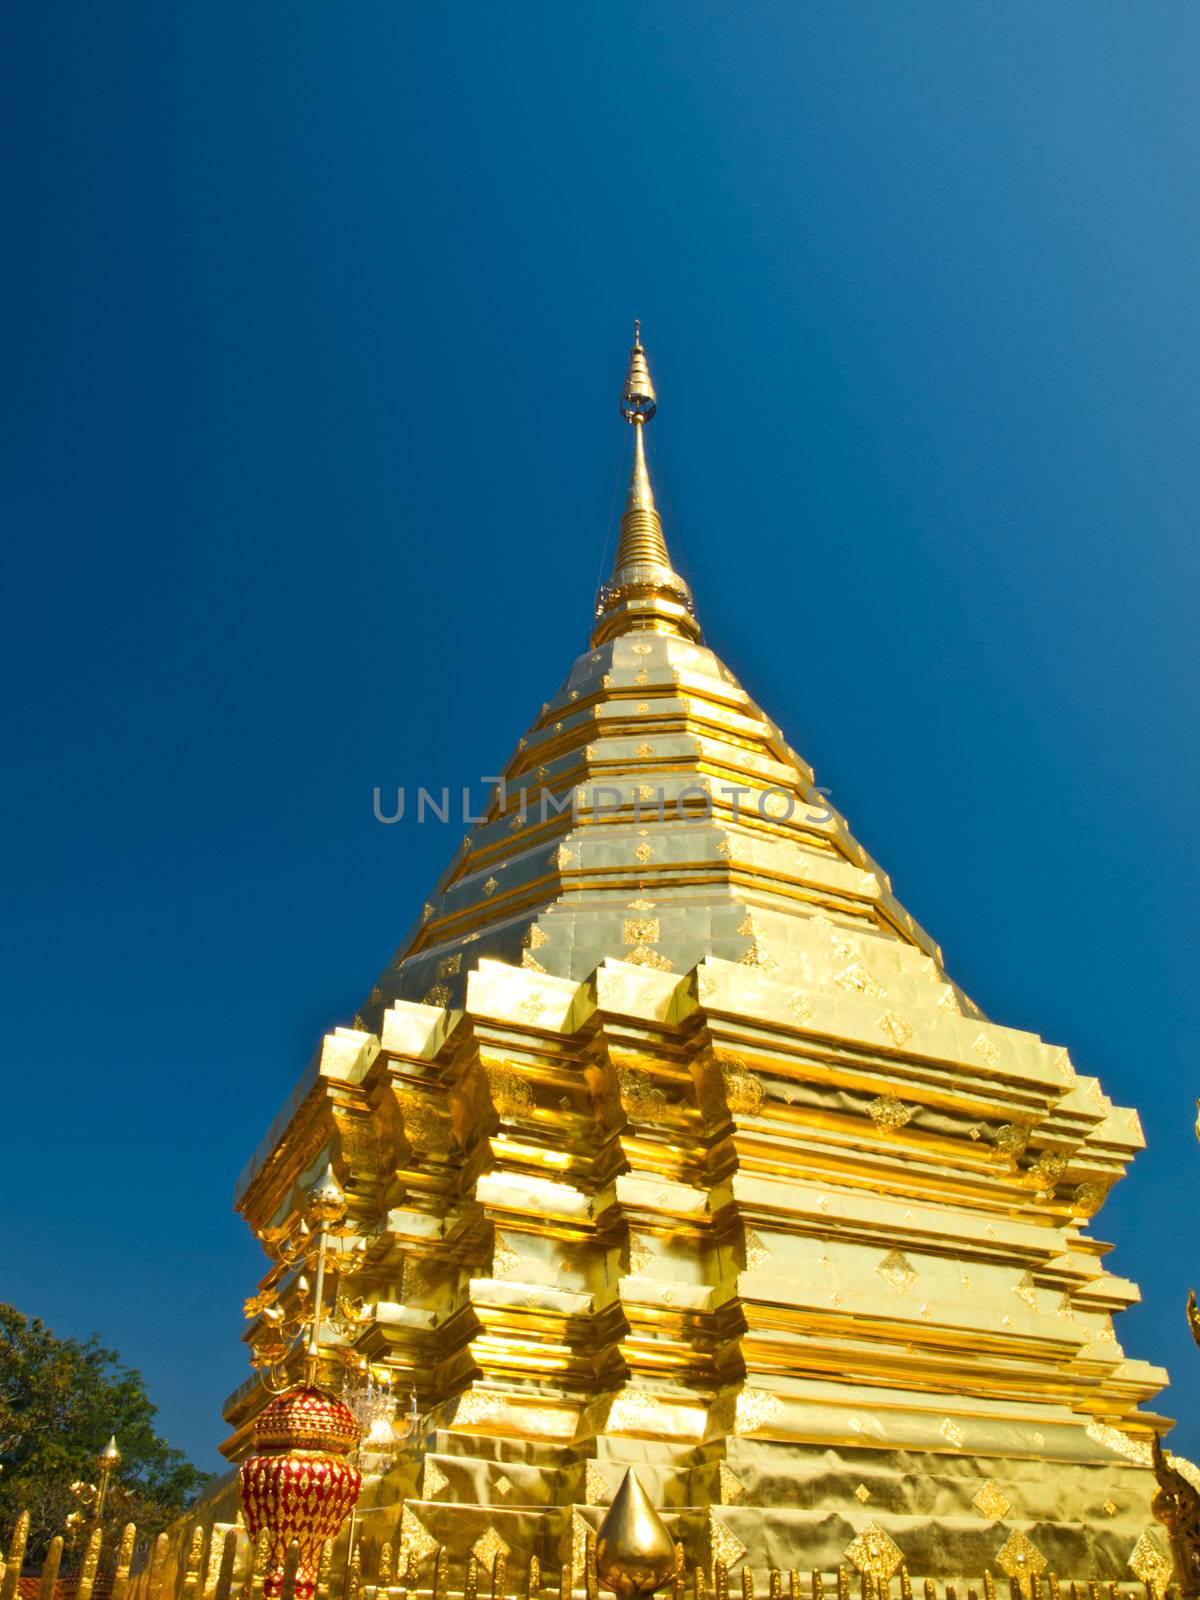 Golden pagoda, Wat Phrathat Doi Suthep temple in Chiang Mai, Thailand.
any kind of art decorated in Buddhist church, temple etc.They are public domain or treasure of Buddhism, no restrict in copy of use.